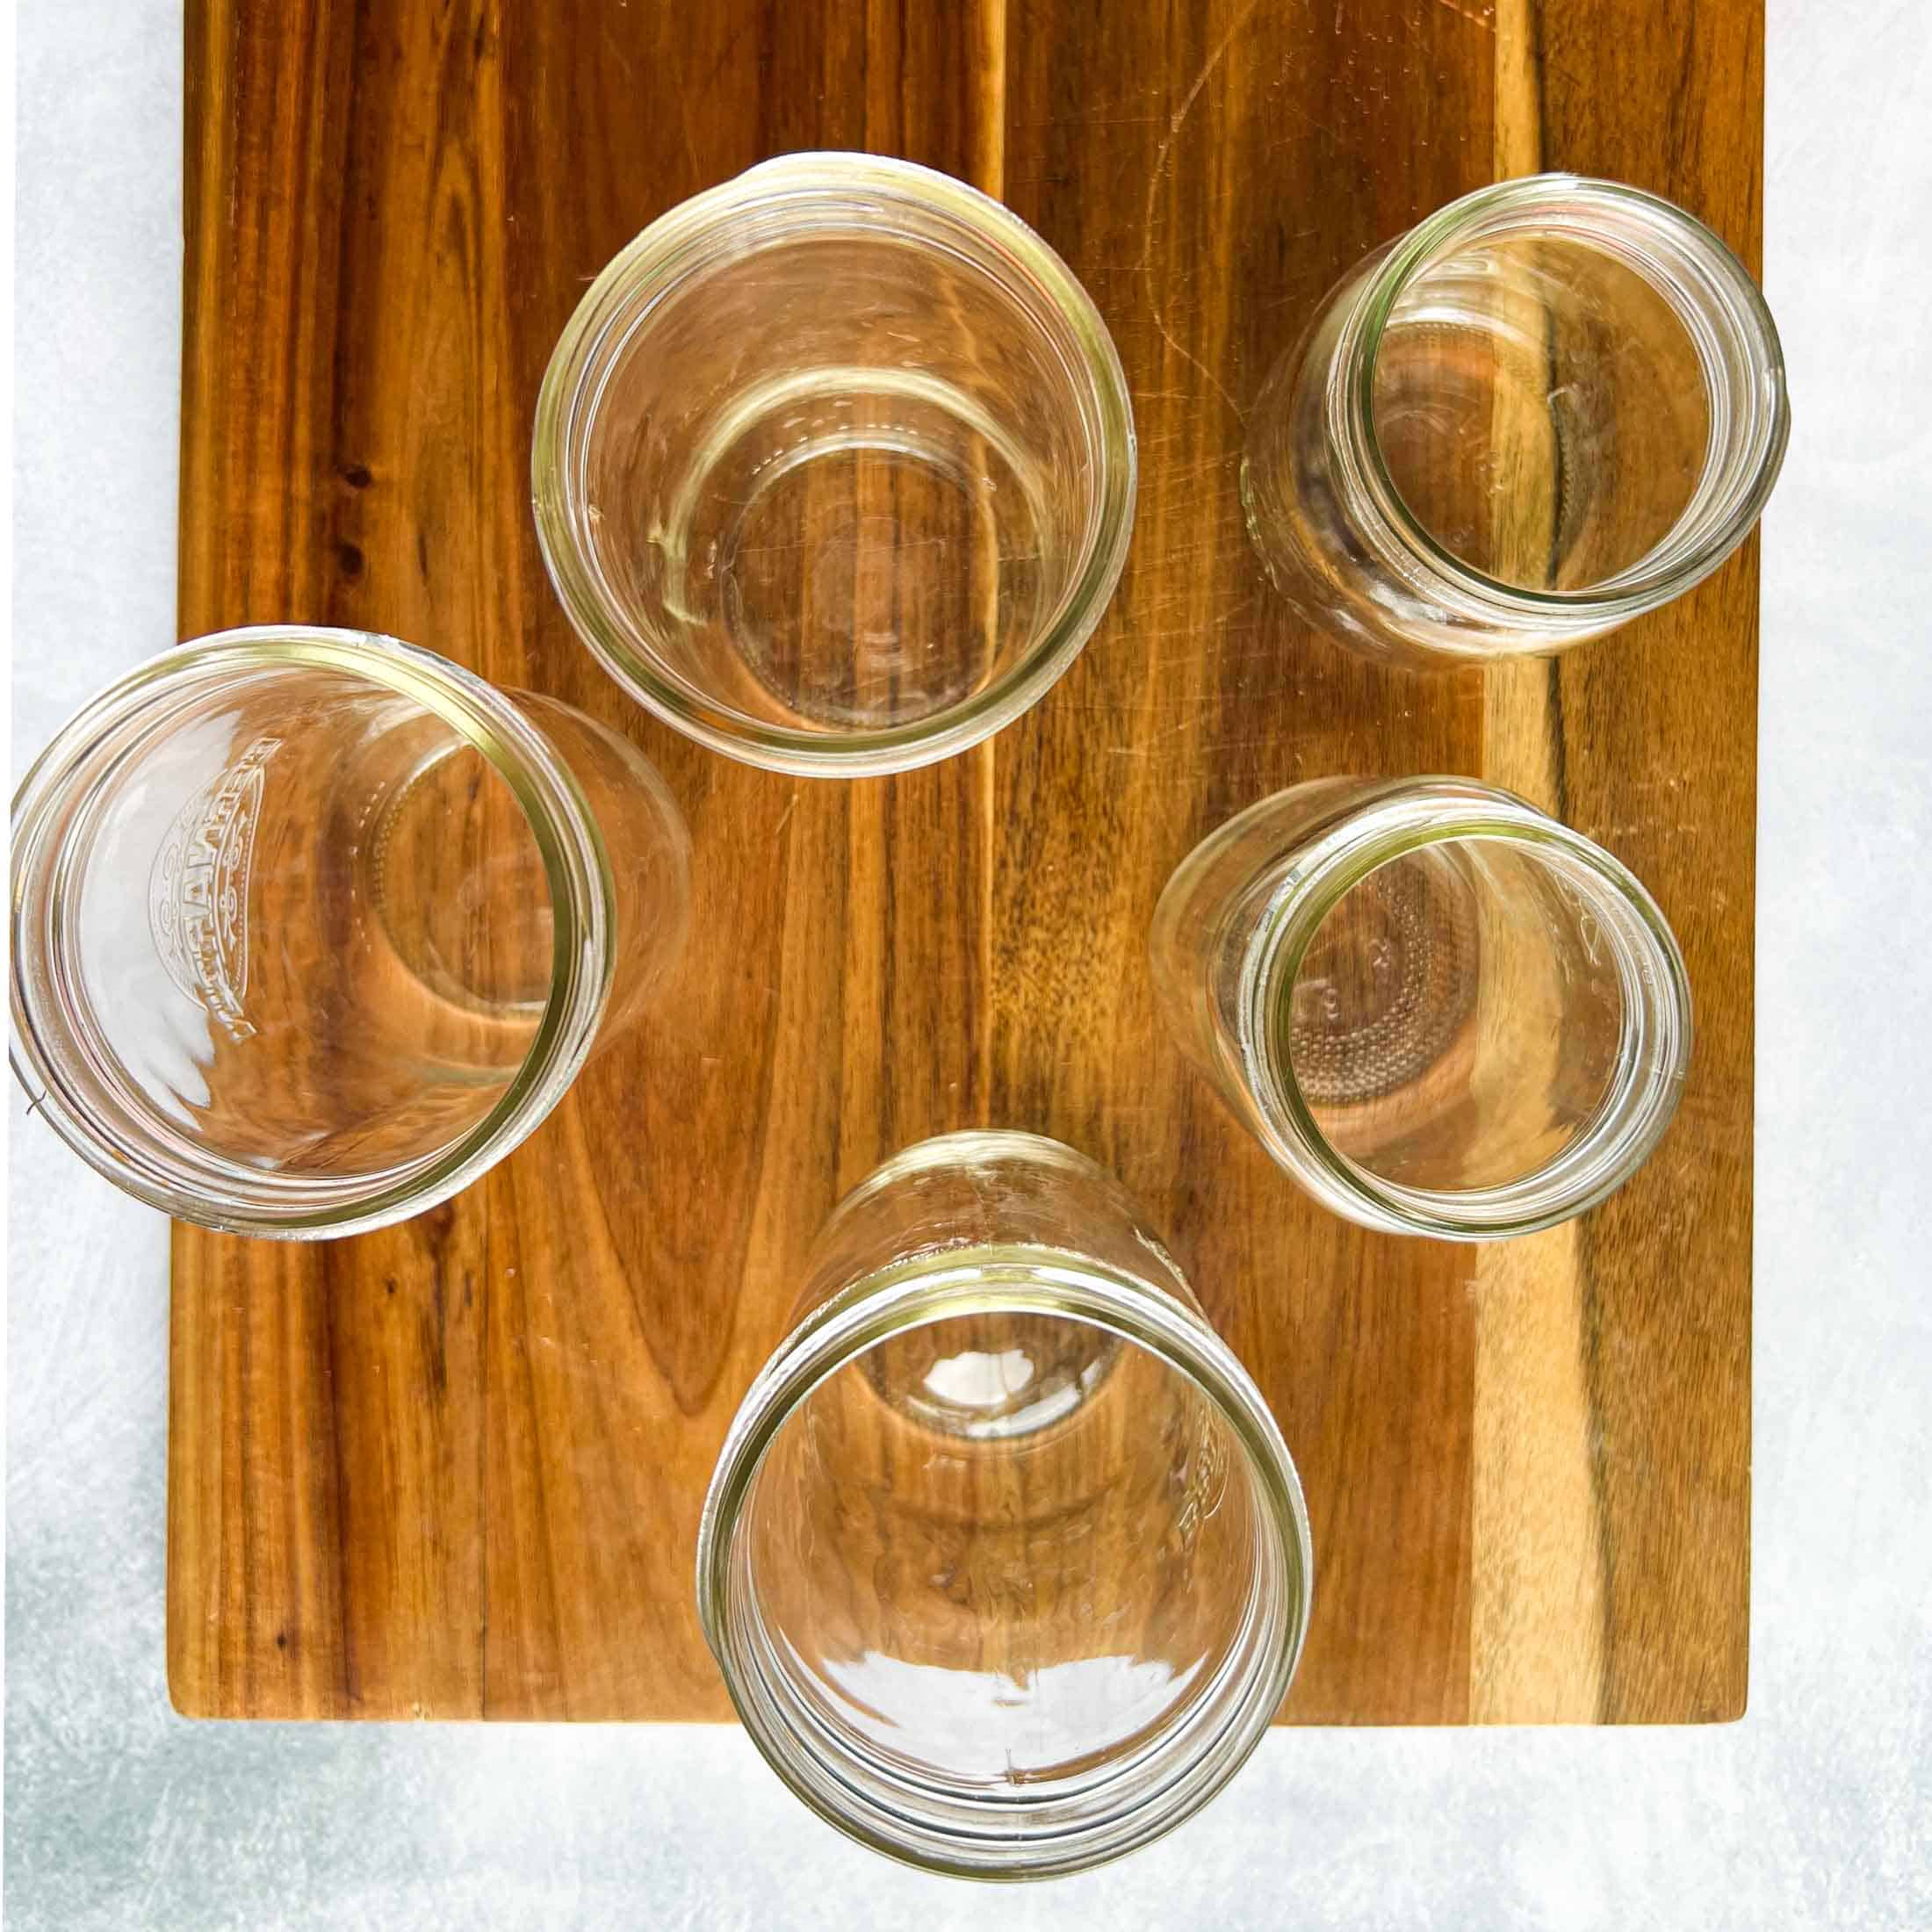 Five jars of varying sizes on a wooden cutting board.